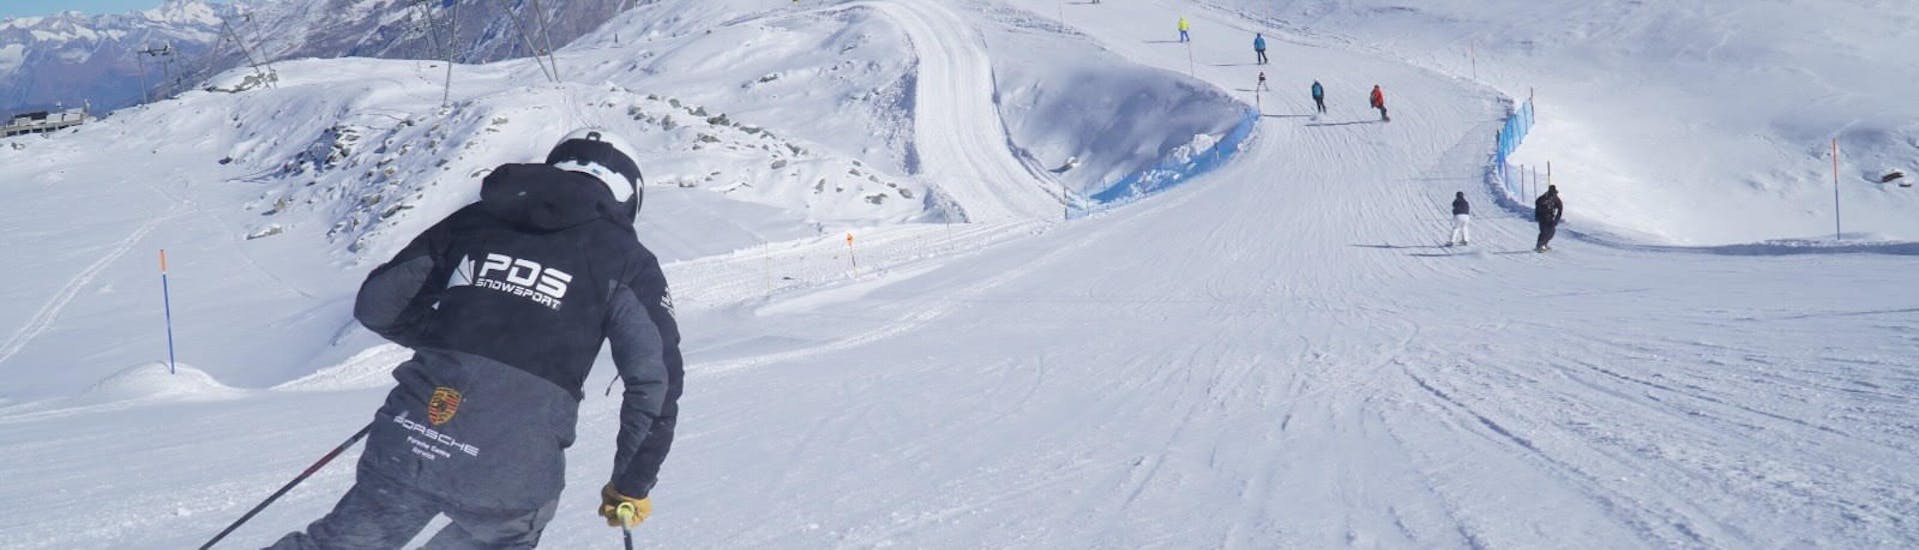 A skier races down the slope during his ski lessons for adults with the PDS Snowsports ski school in Champéry.